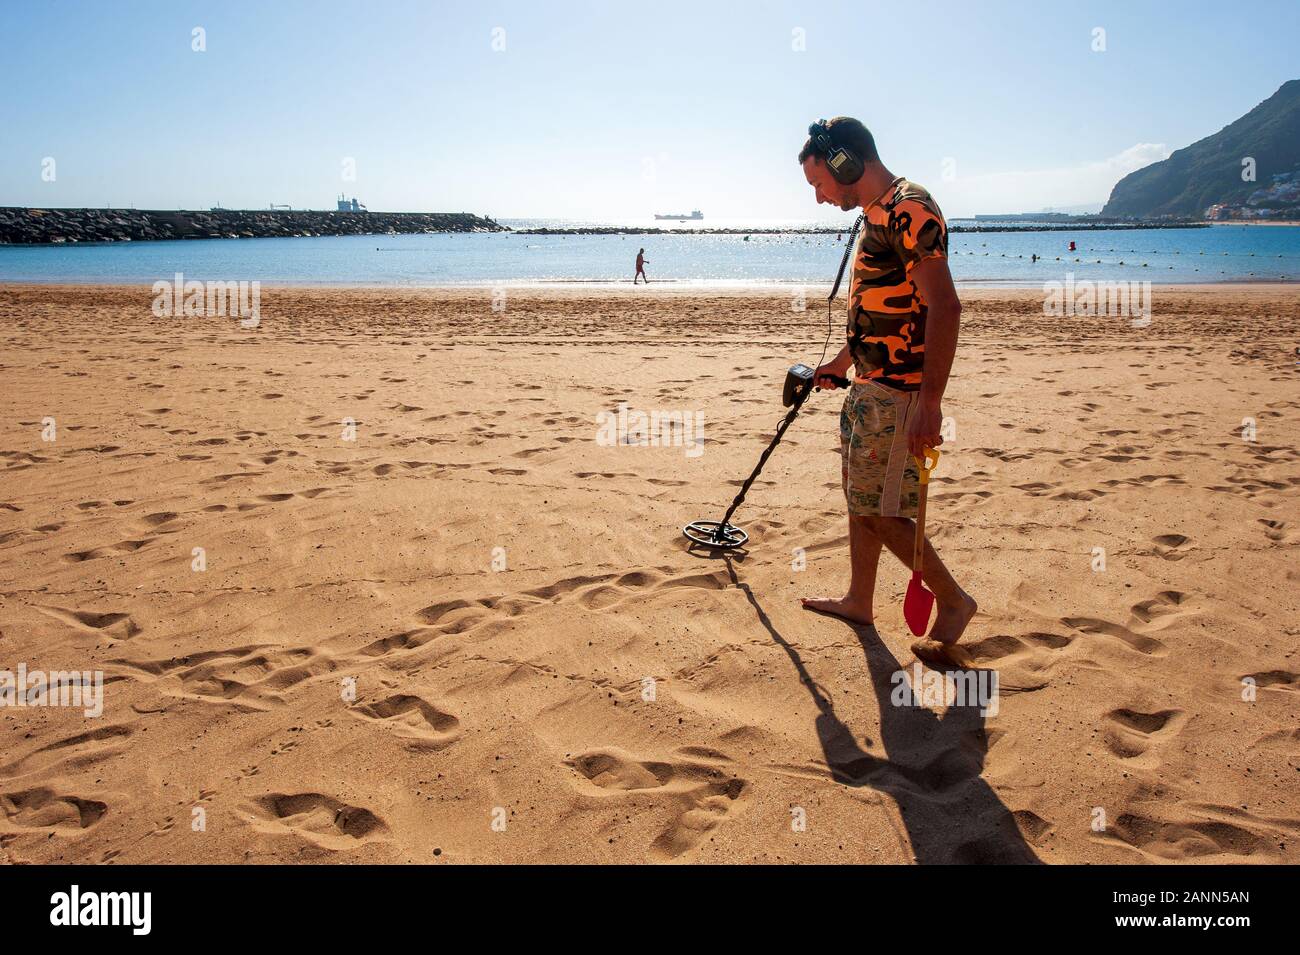 CANARY ISLAND TENERIFE, SPAIN - 23 DEC, 2019: A man with a metal detector searching for metal things in the sand of Playa de Las Teresitas on Tenerife Stock Photo